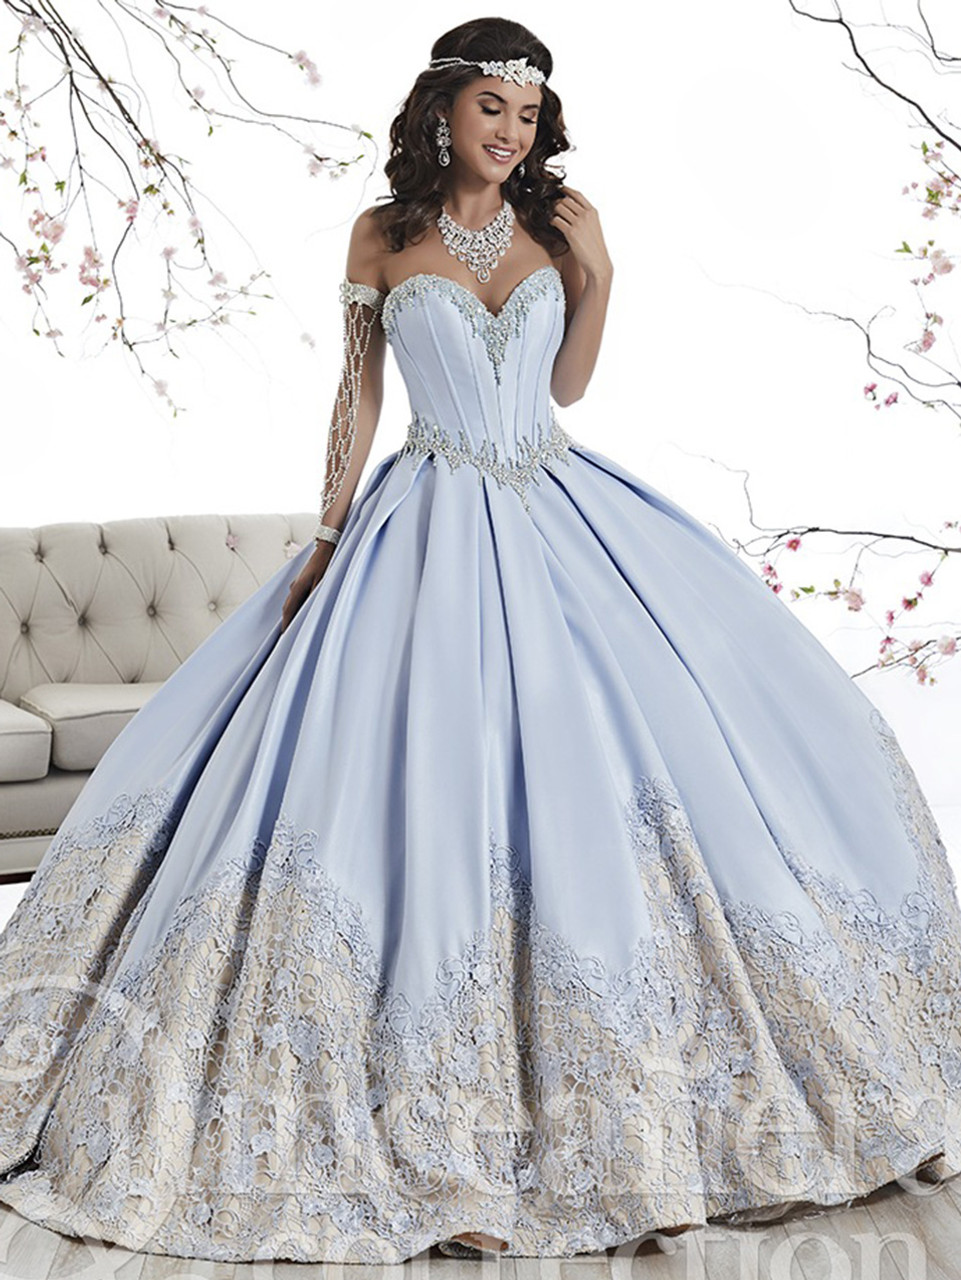 Dusty Blue Lace Ball Gown Puffy Quinceanera Dress